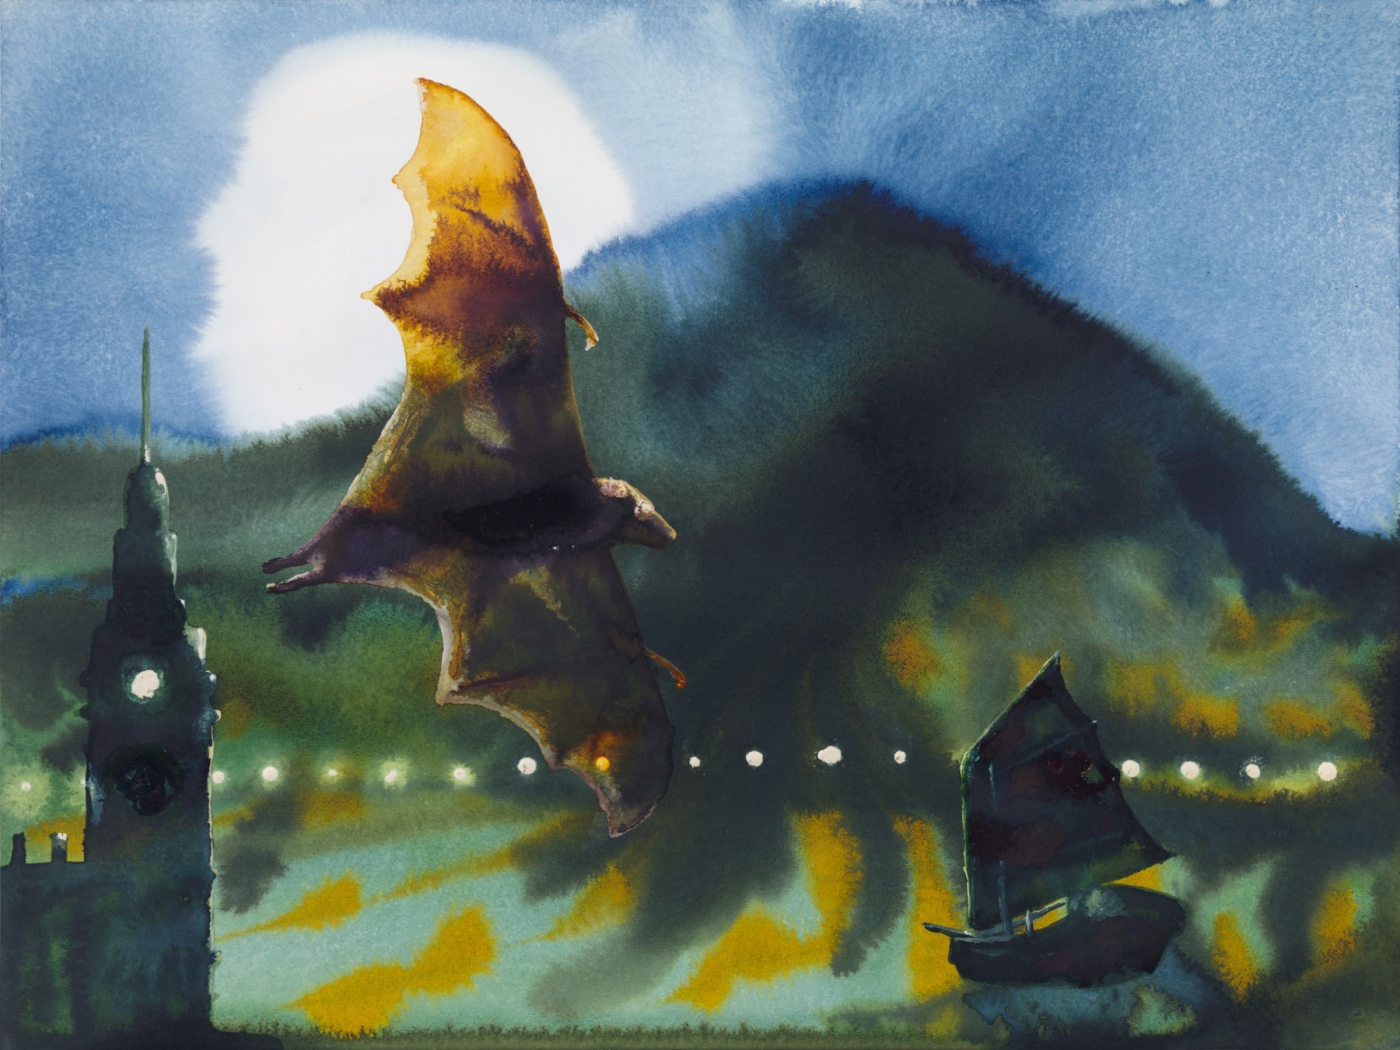 watercolor of a bat flying at night with the moon and a mountain in the background and a boat and tower in the foreground